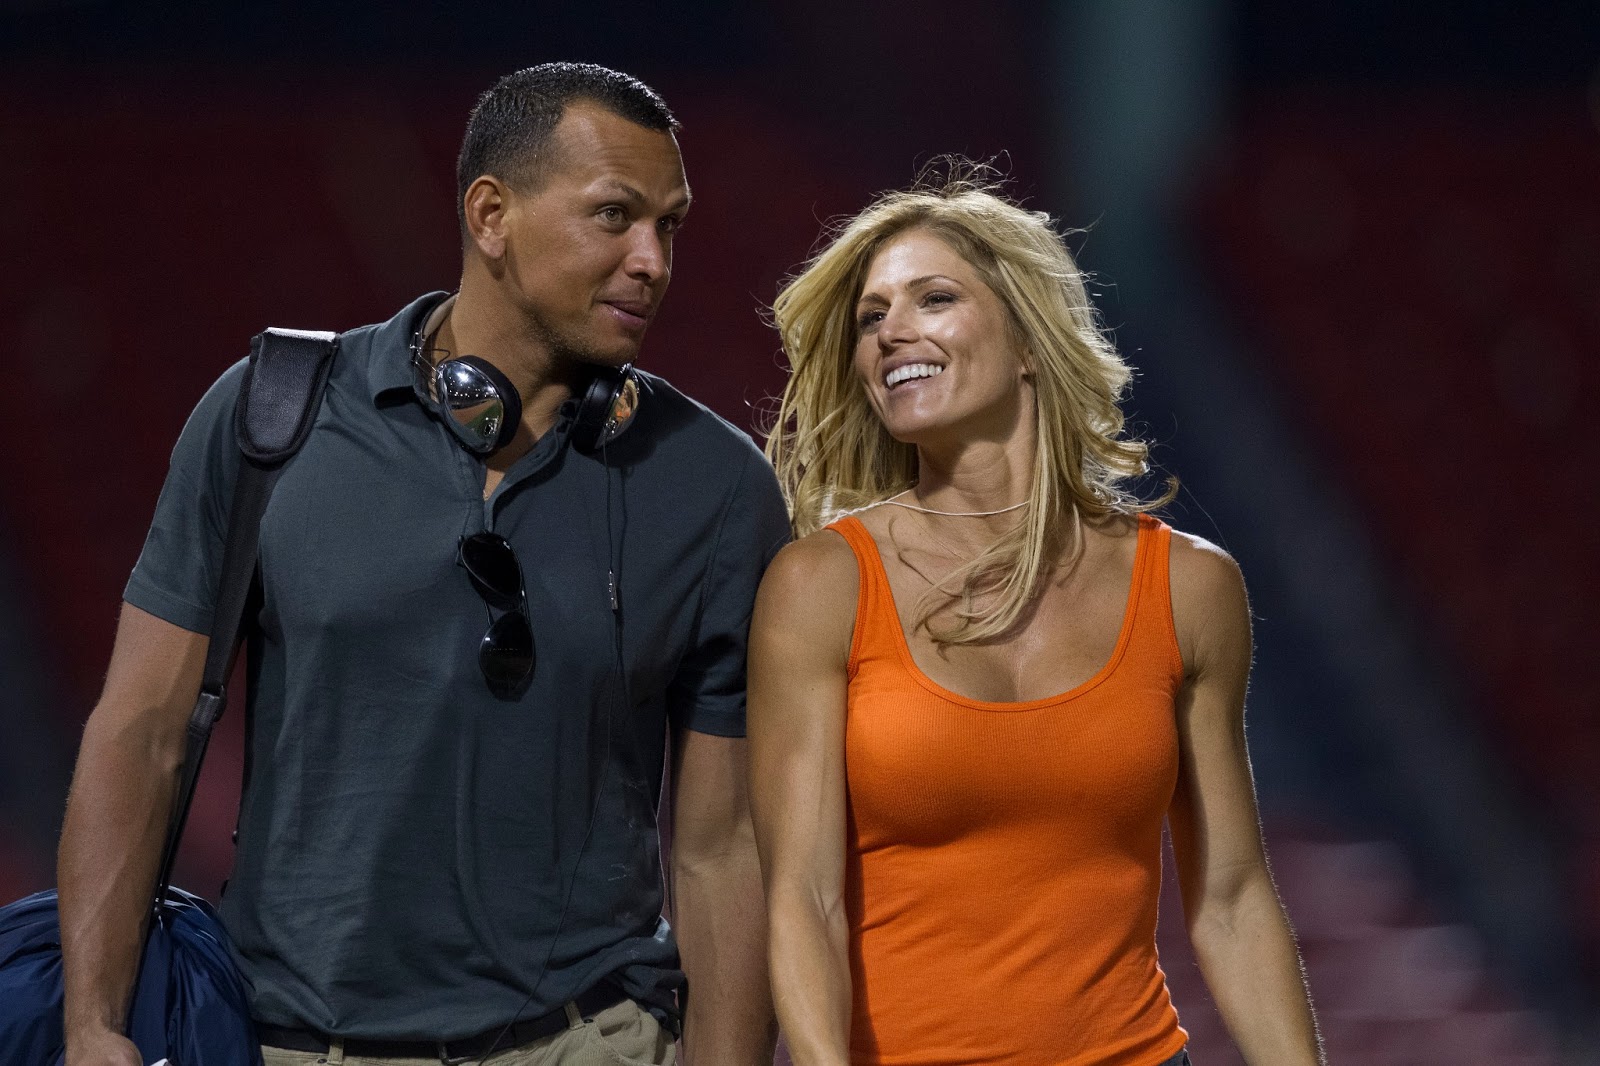 All About Sports: Alex Rodriguez With His Wife In These Pictures 2013